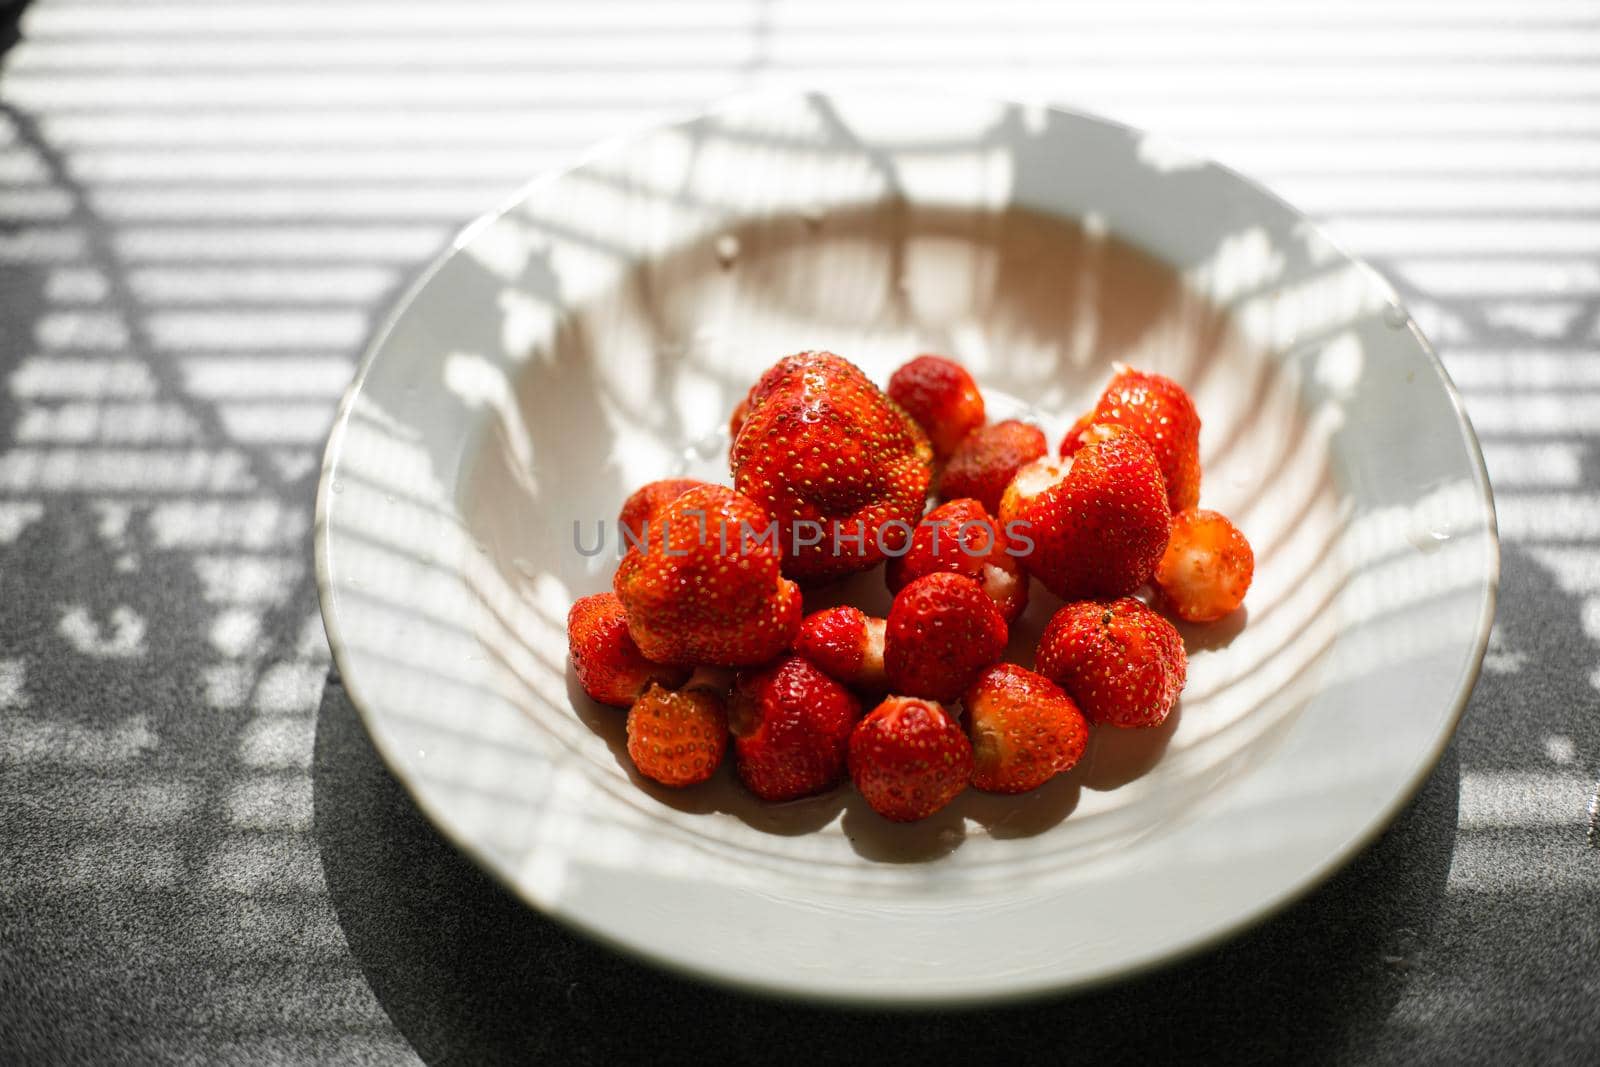 Top view of a ceramic plate full of fresh and sweet organic strawberries picked in the garden in sunlight. Window shade on the kitchen table.